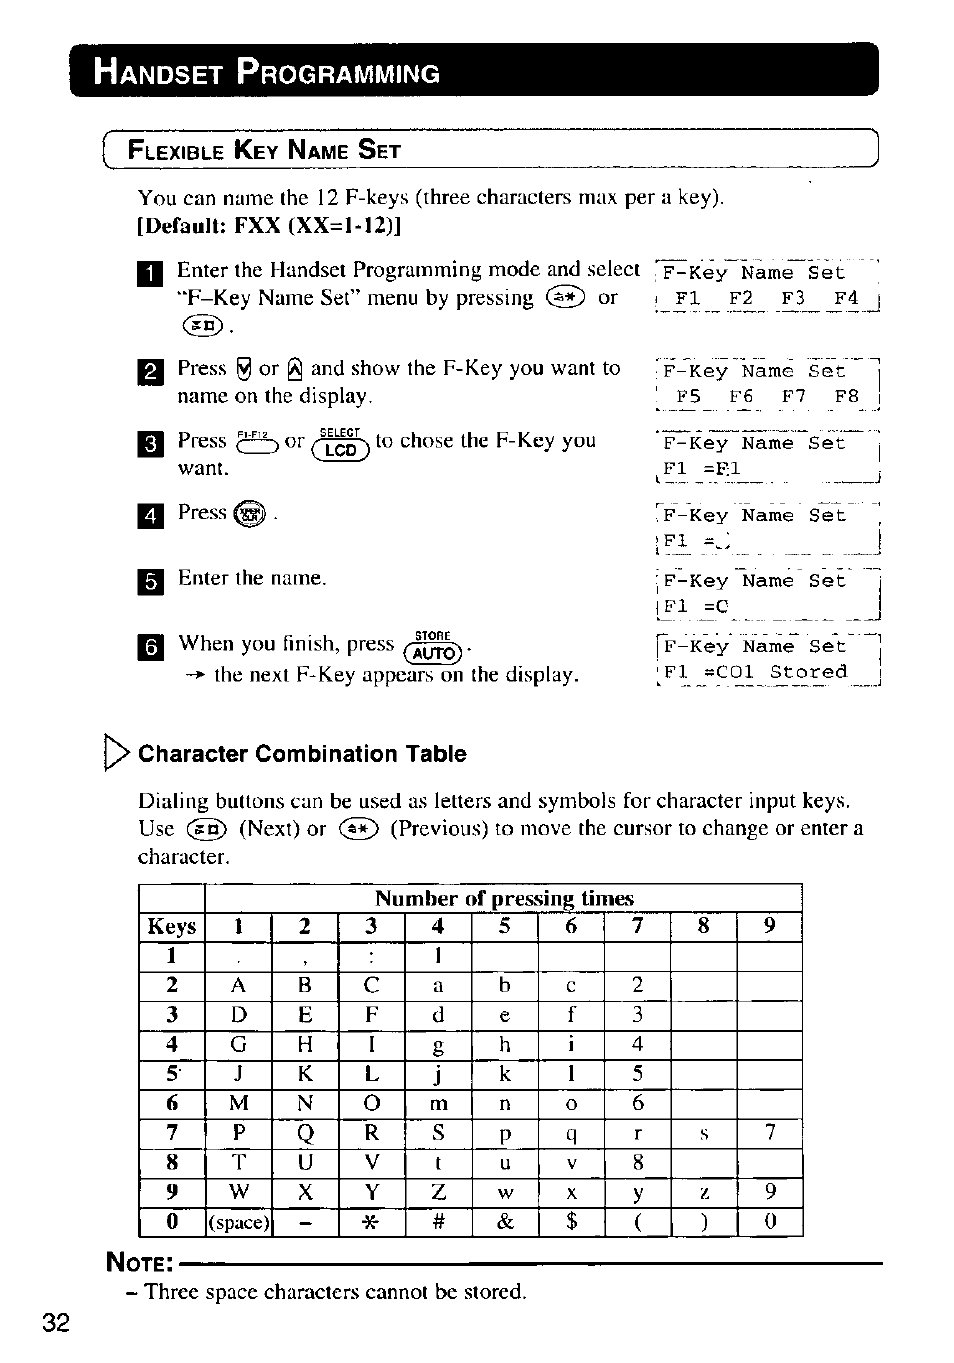 Character combination table | Panasonic KX-T7885 User Manual | Page 32 / 48